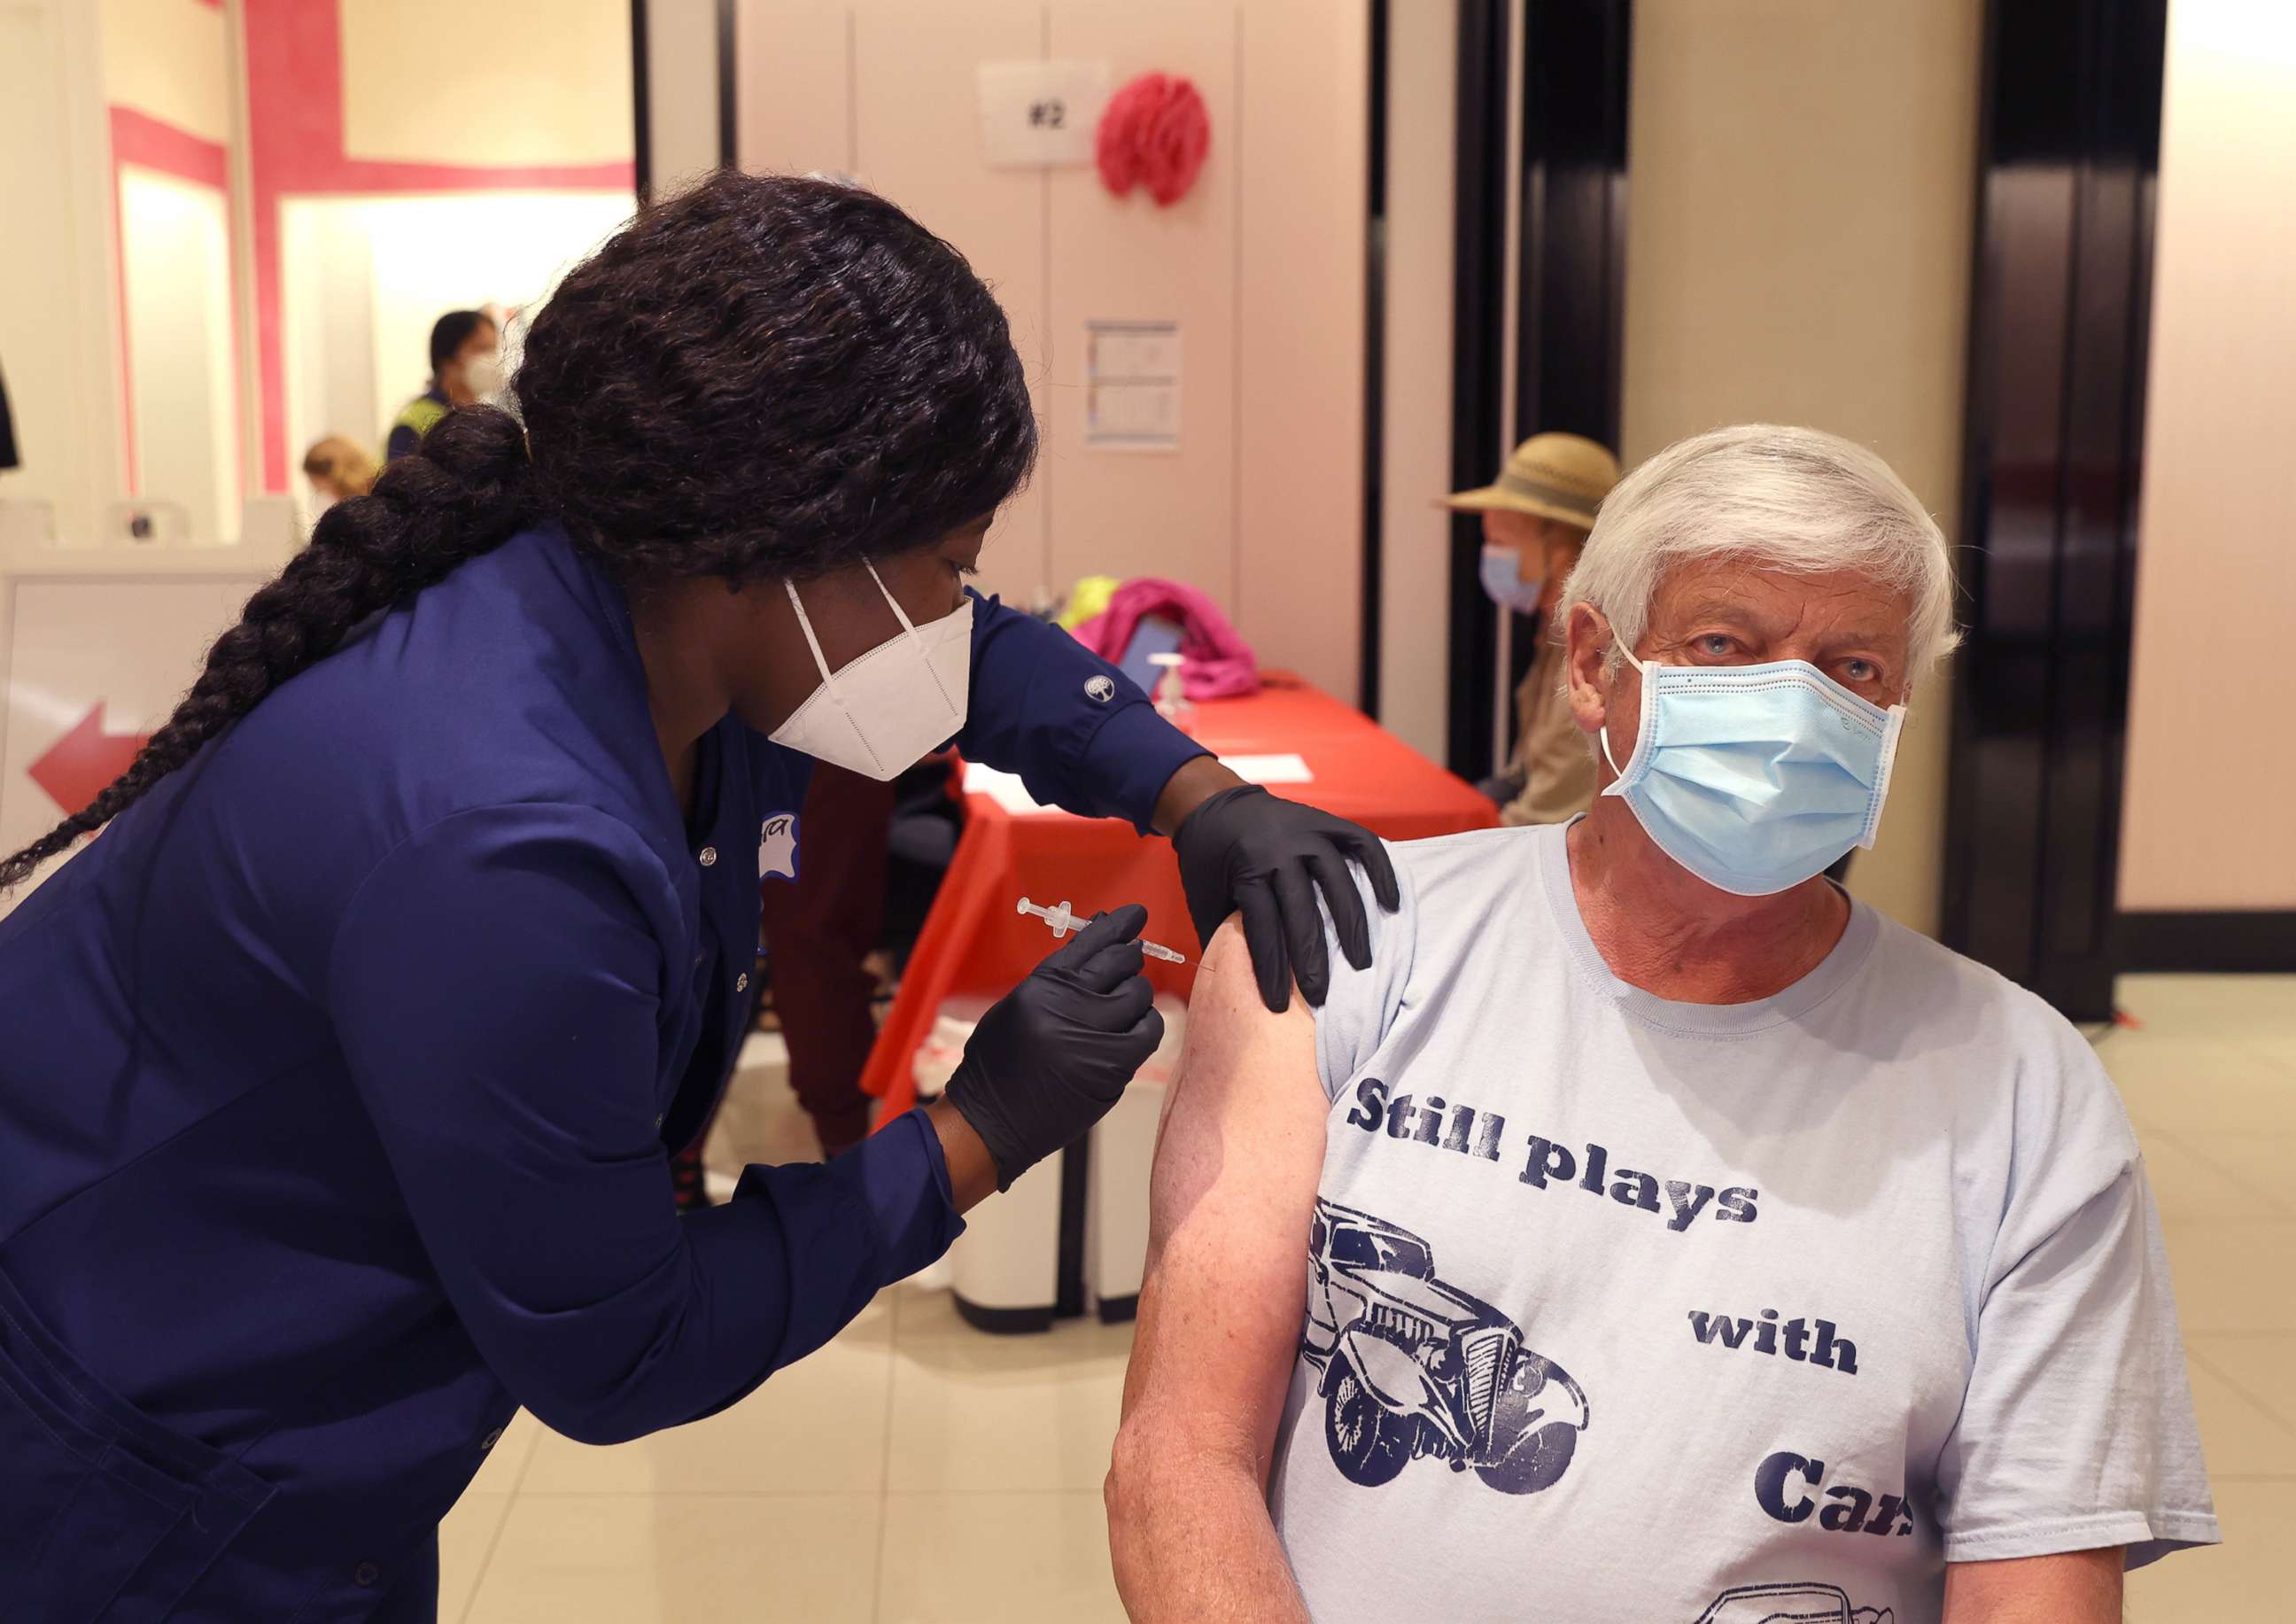 PHOTO: A registered nurse administers a COVID-19 booster vaccination to a person at a COVID-19 vaccination clinic on April 6, 2022, in San Rafael, Calif.